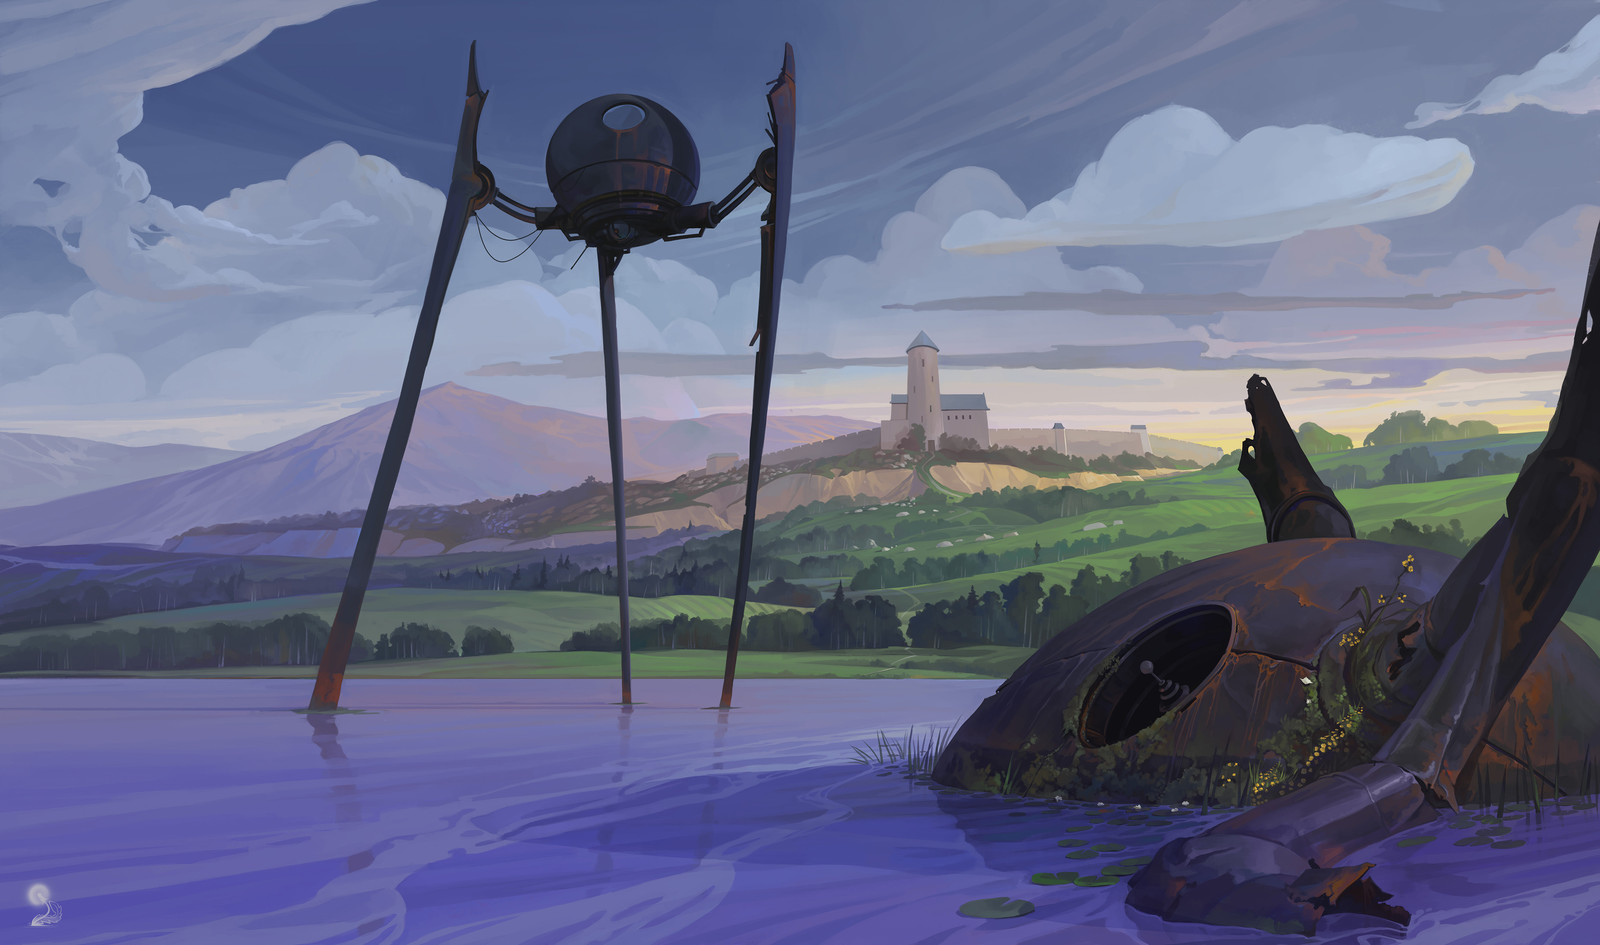 The Lake. And UFOs. And The Castle.